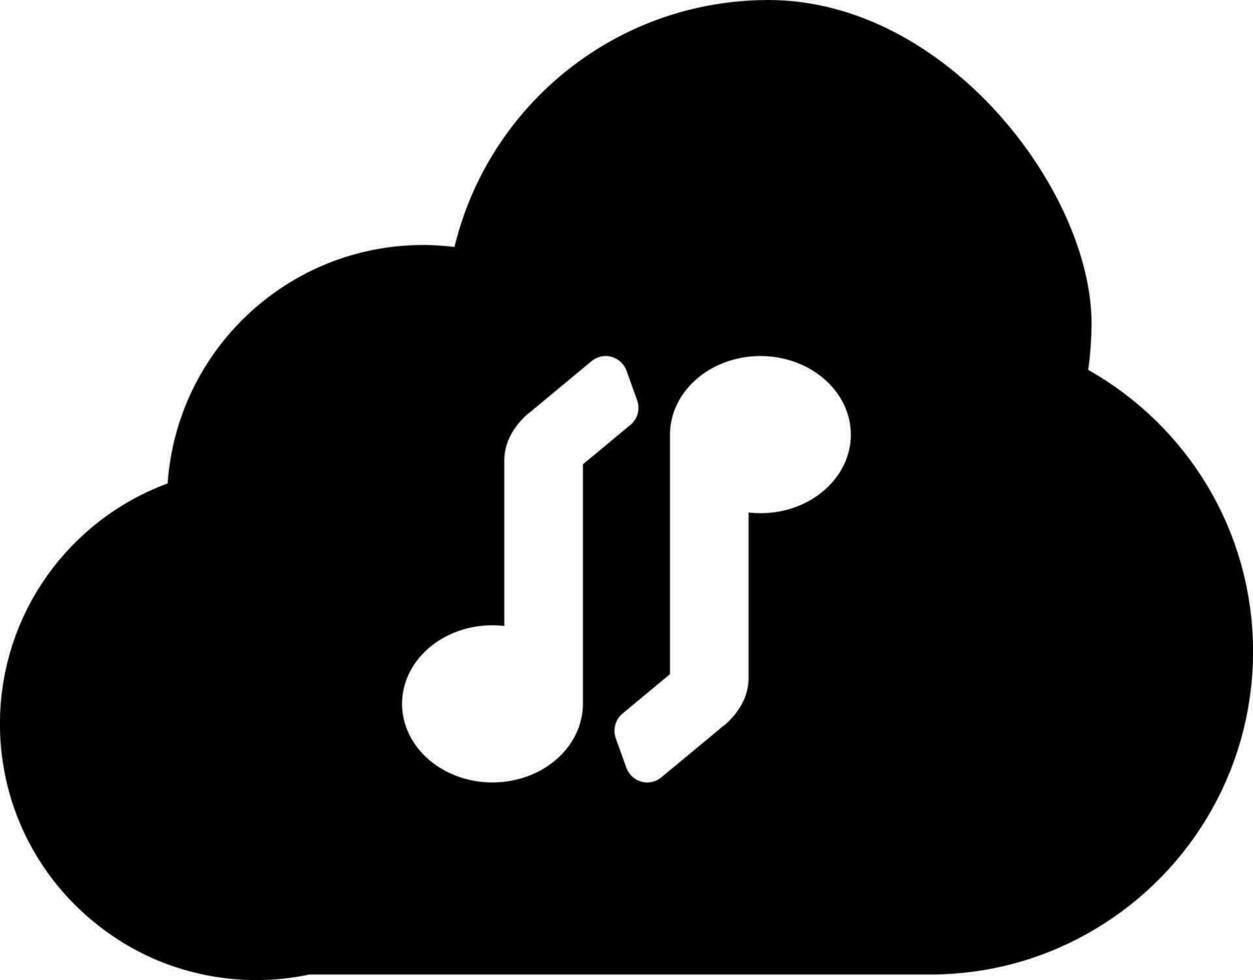 Cloud music icon in black and white color. vector